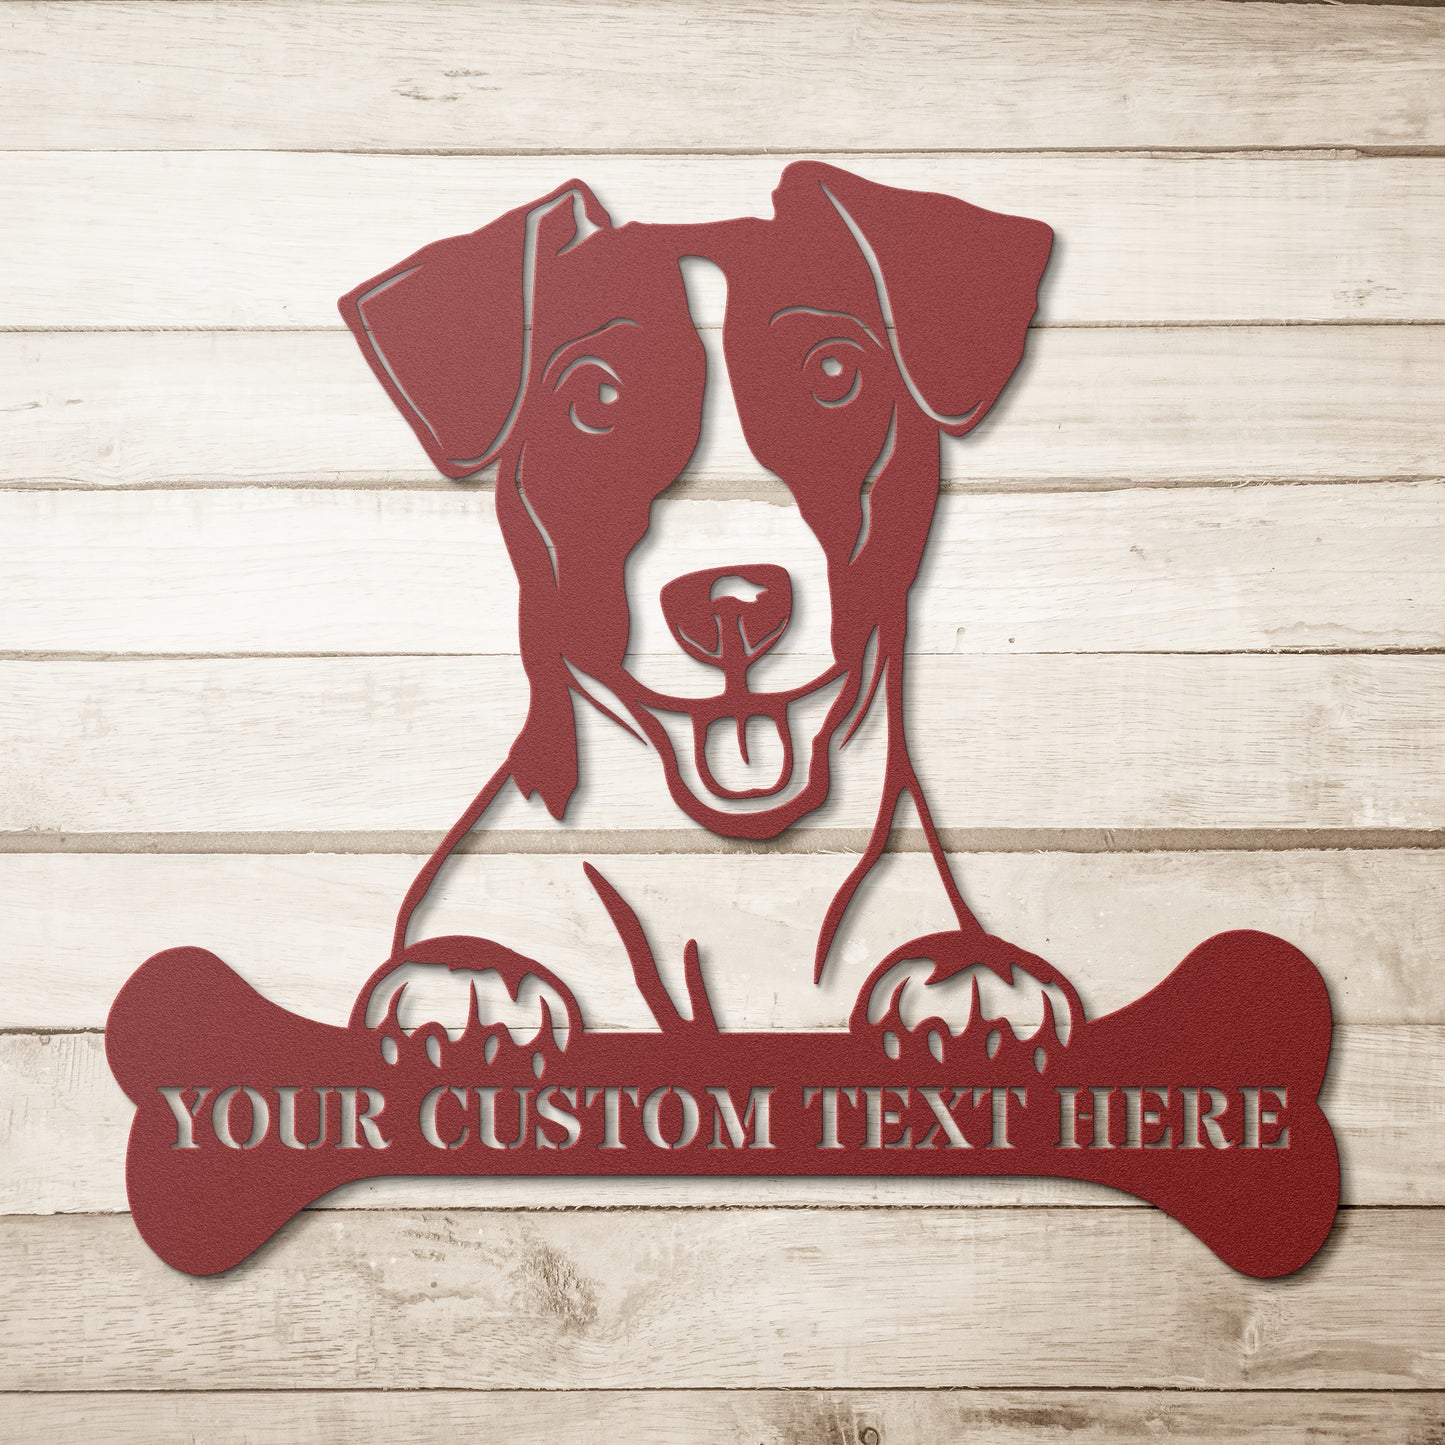 Personalized Jack Russell Terrier Name Metal Sign. Customizable Dog Owner Wall Decor Gift. Terrier Portrait Yard Sign. Dog House Name Sign